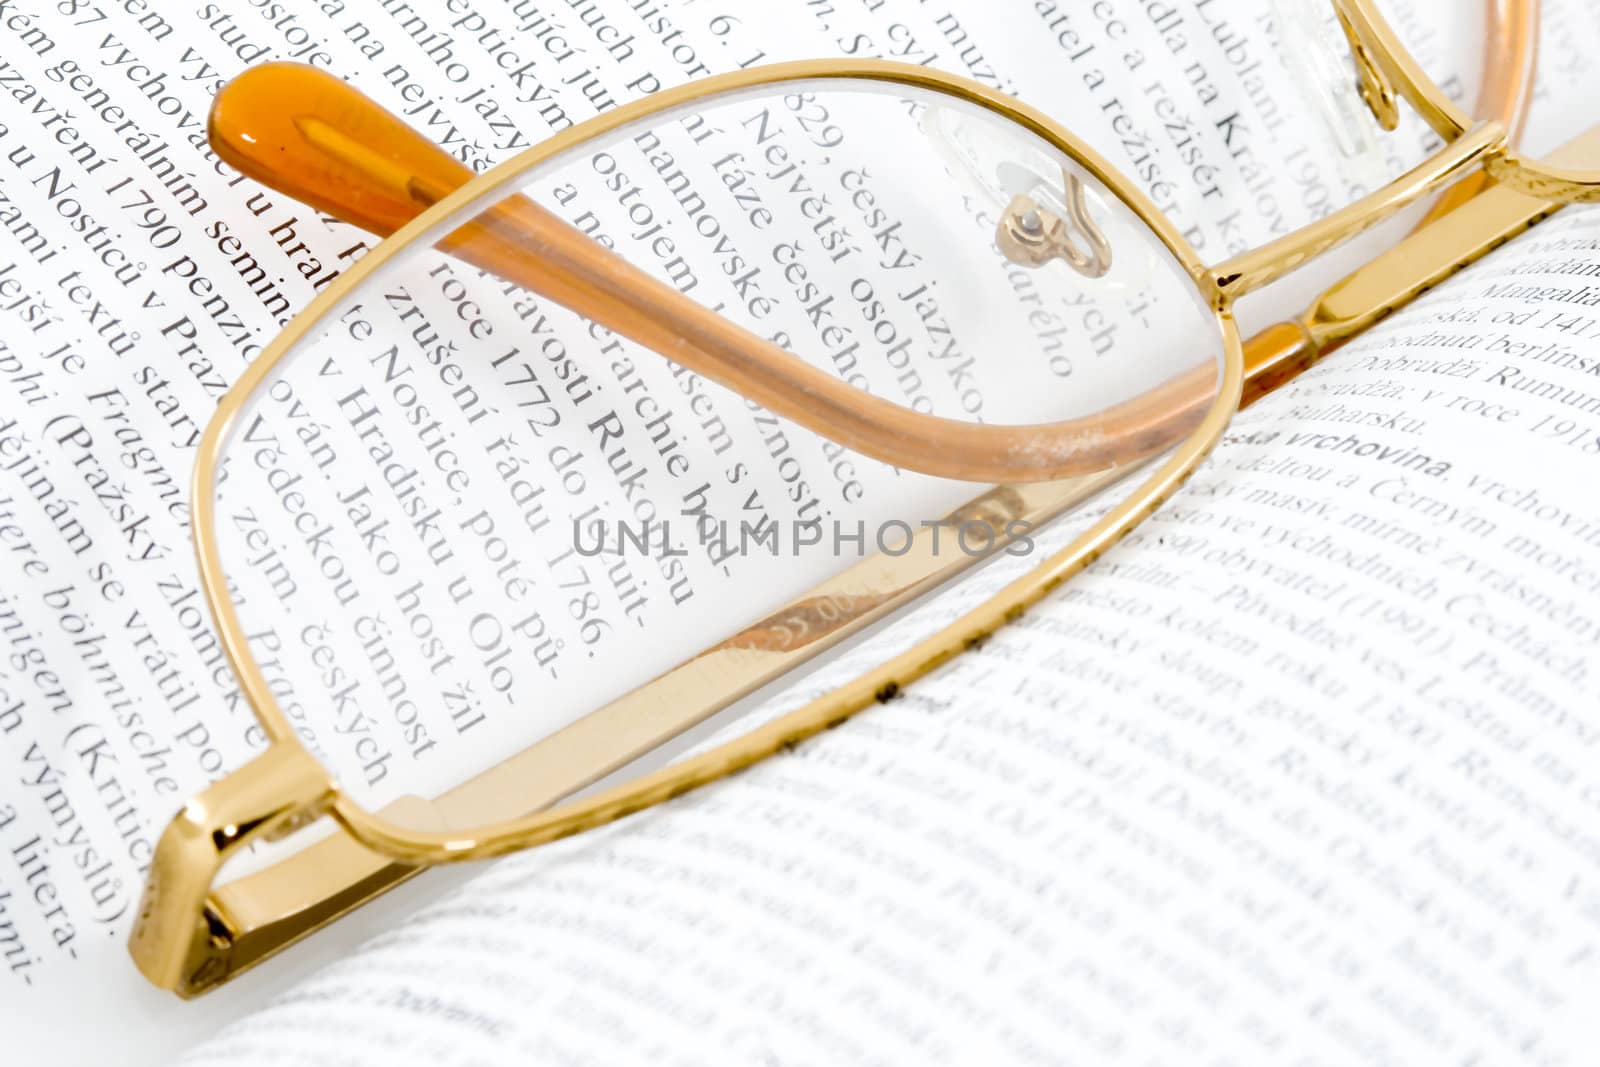 glasses lying on an open book - close up